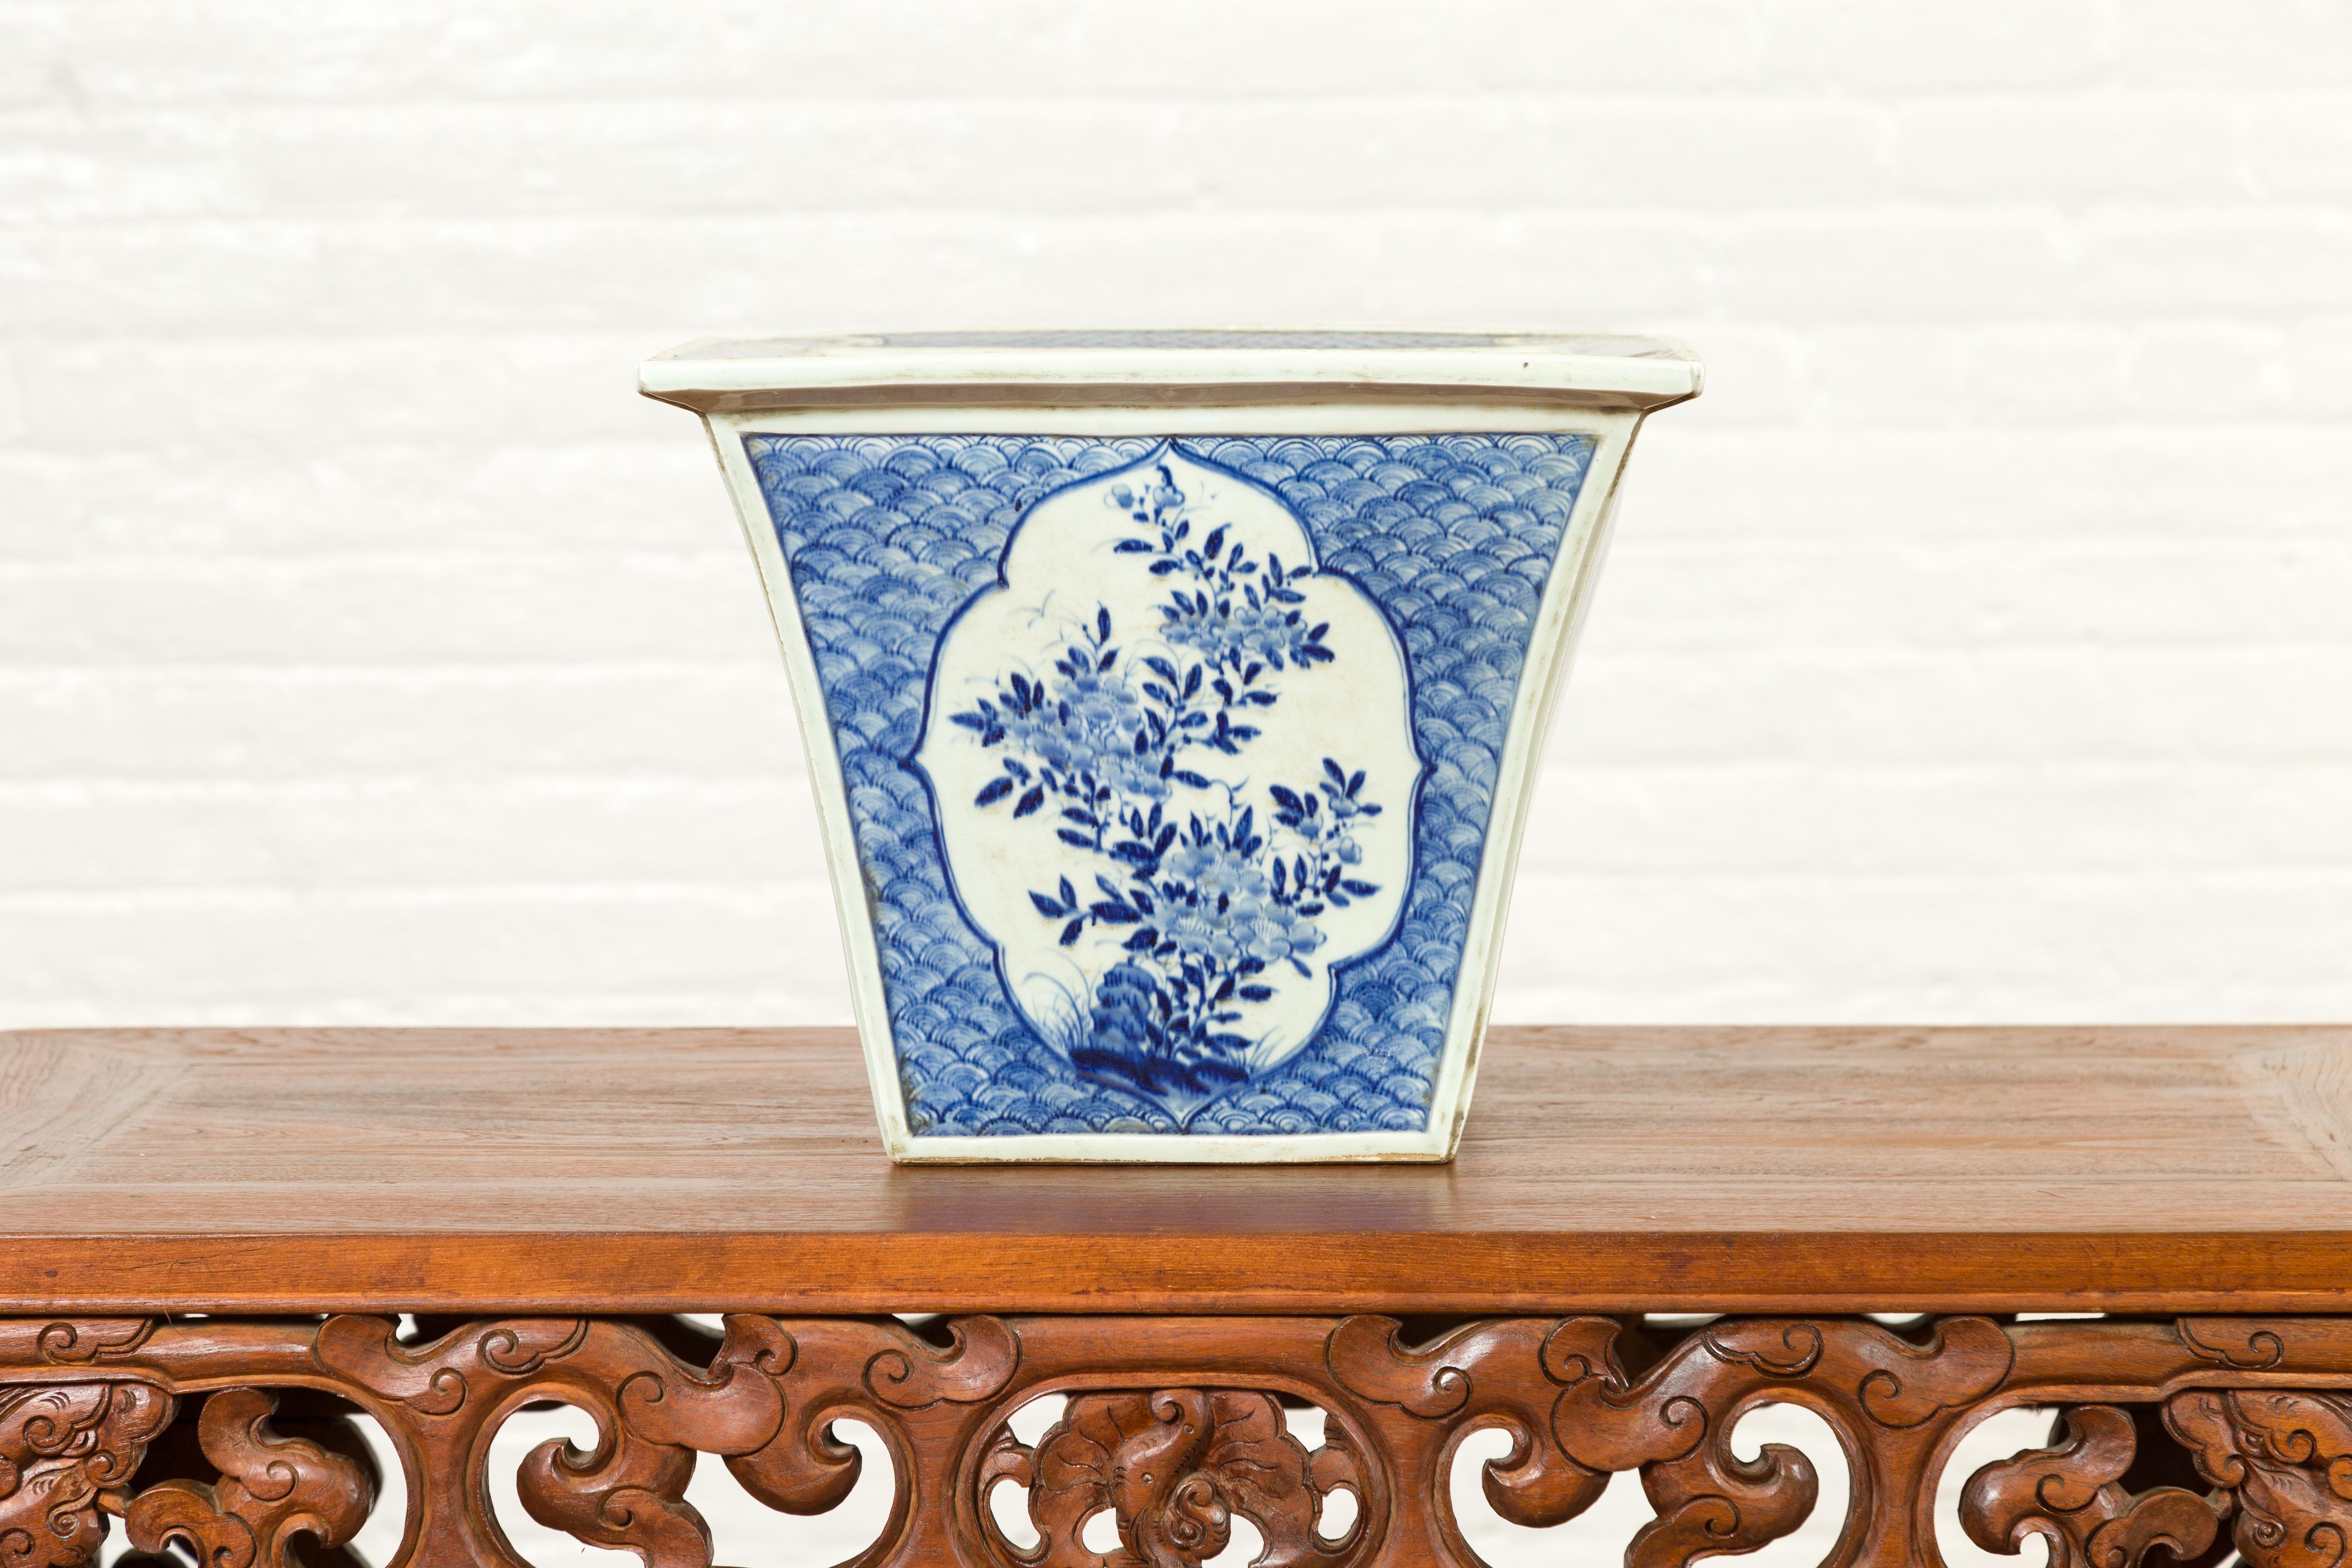 A Chinese Qing Dynasty period blue and white planter from the 19th century, with floral décor and underglaze design. Created in China during the Qing Dynasty, this planter features a flaring silhouette, beautifully adorned with vertical scrolling